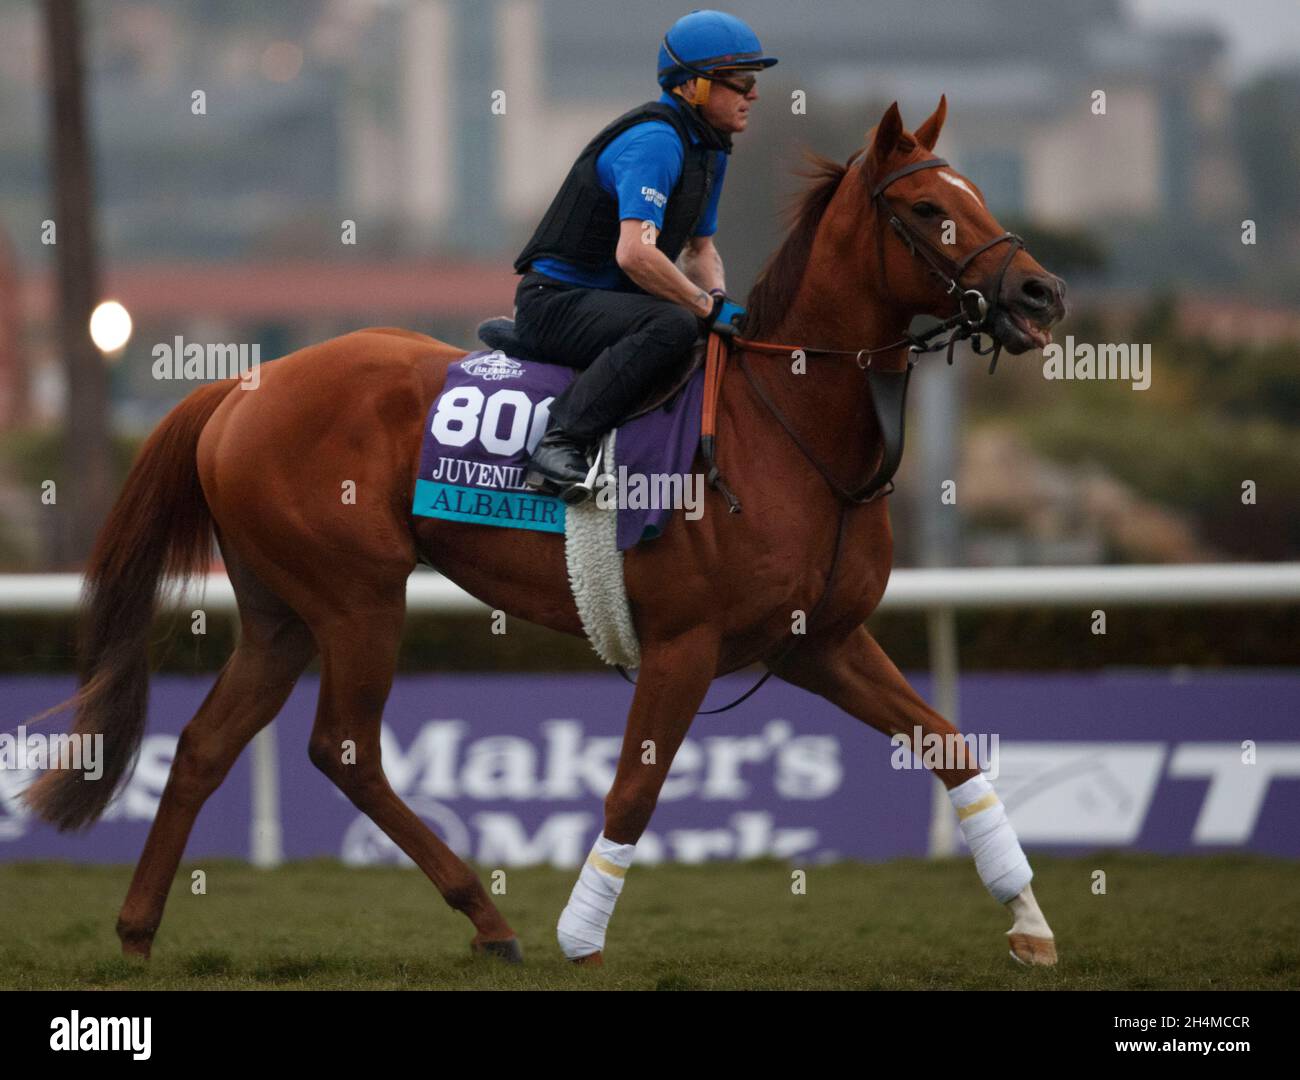 Del Mar, CA, USA. 2nd Nov, 2021. November 2nd 2021: Albahr, entered in the  Breeders' Cup Juvenile Turf and trained by Charlie Appleby, exercises  during the morning training session for Breeders' Cup